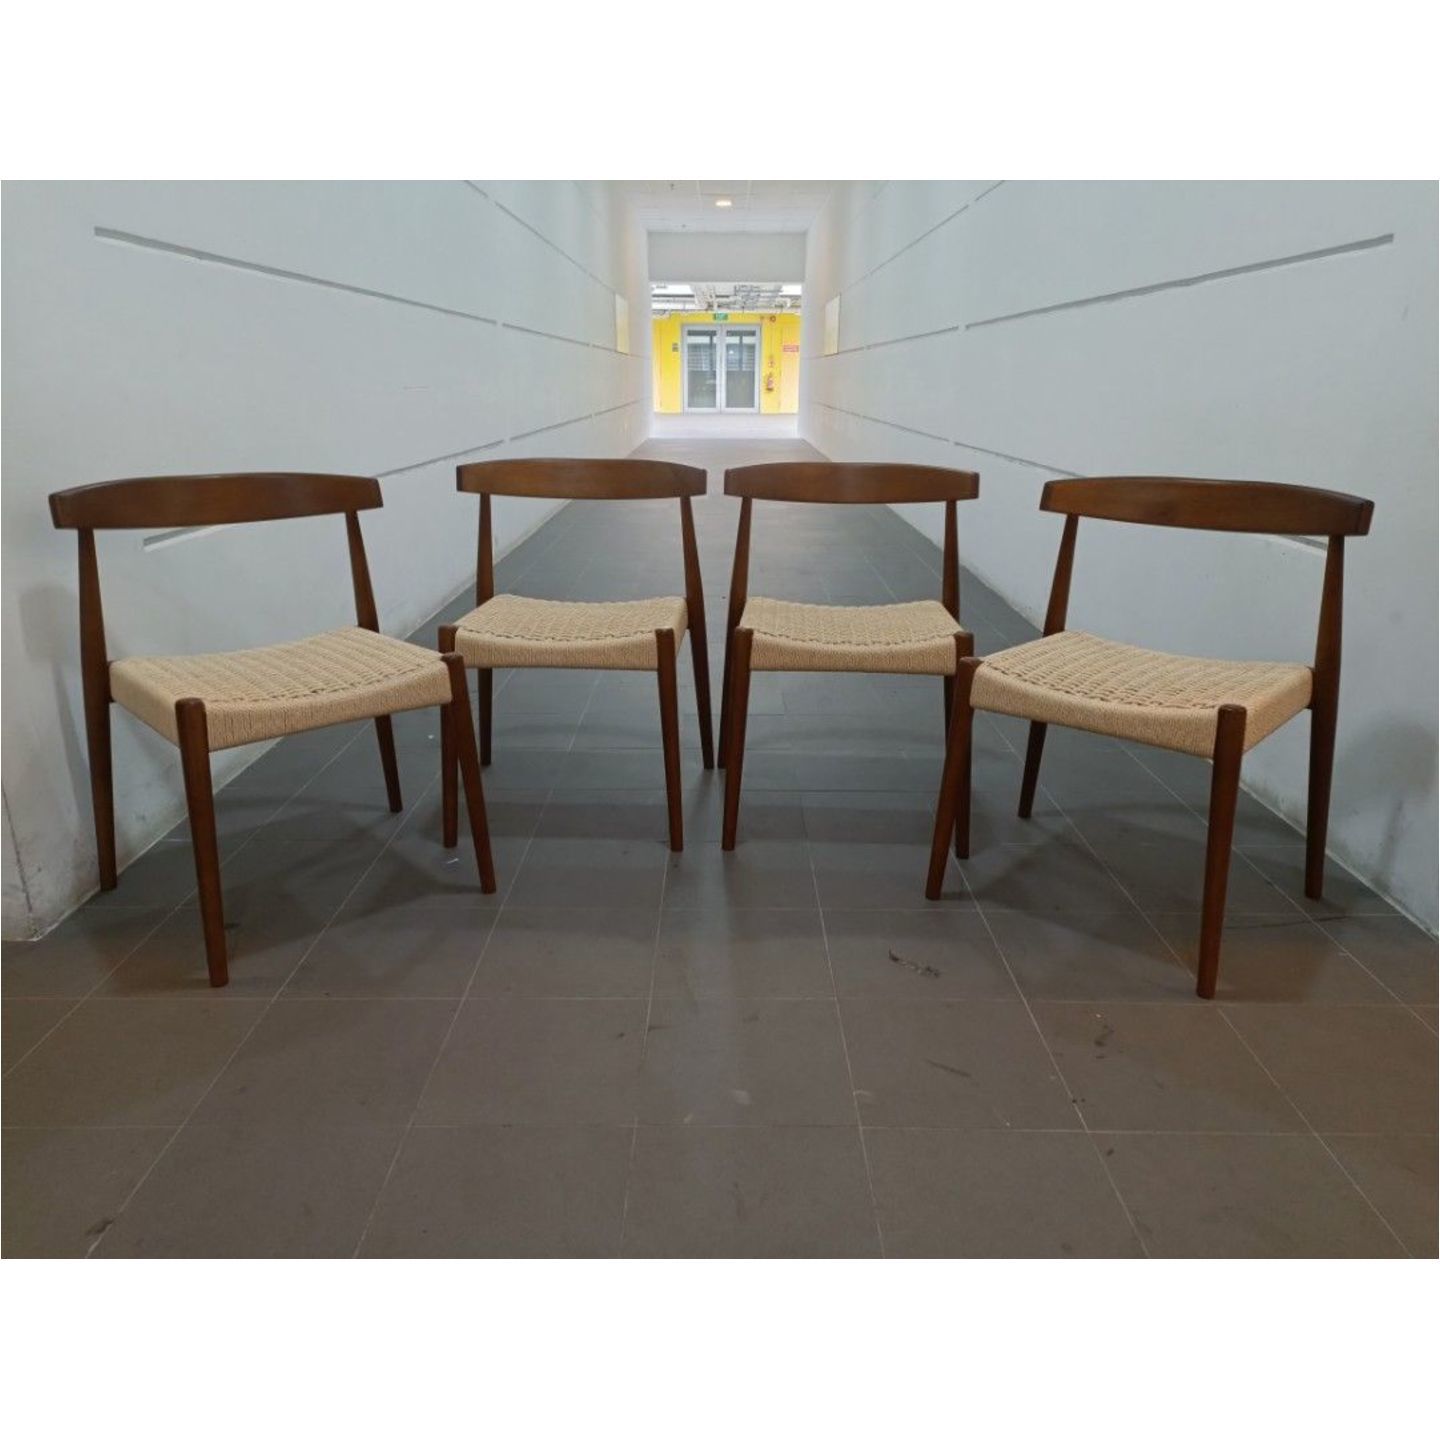 4 x EUNAE Dining Chairs in WHITE WASH